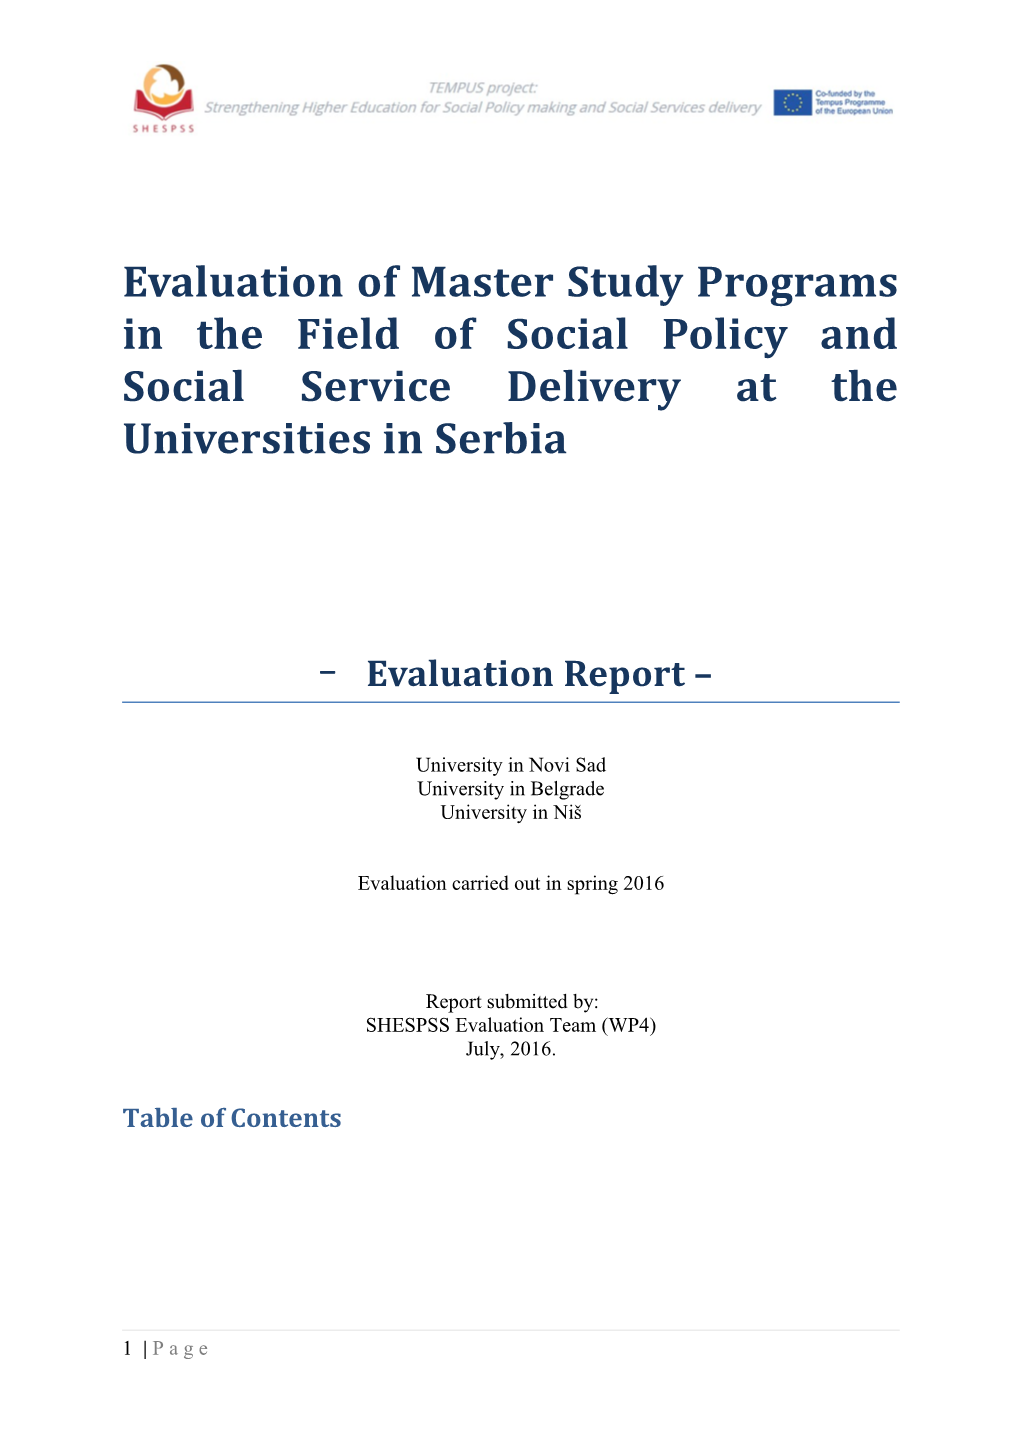 Evaluation of Master Study Programs in the Field of Social Policy and Social Service Delivery